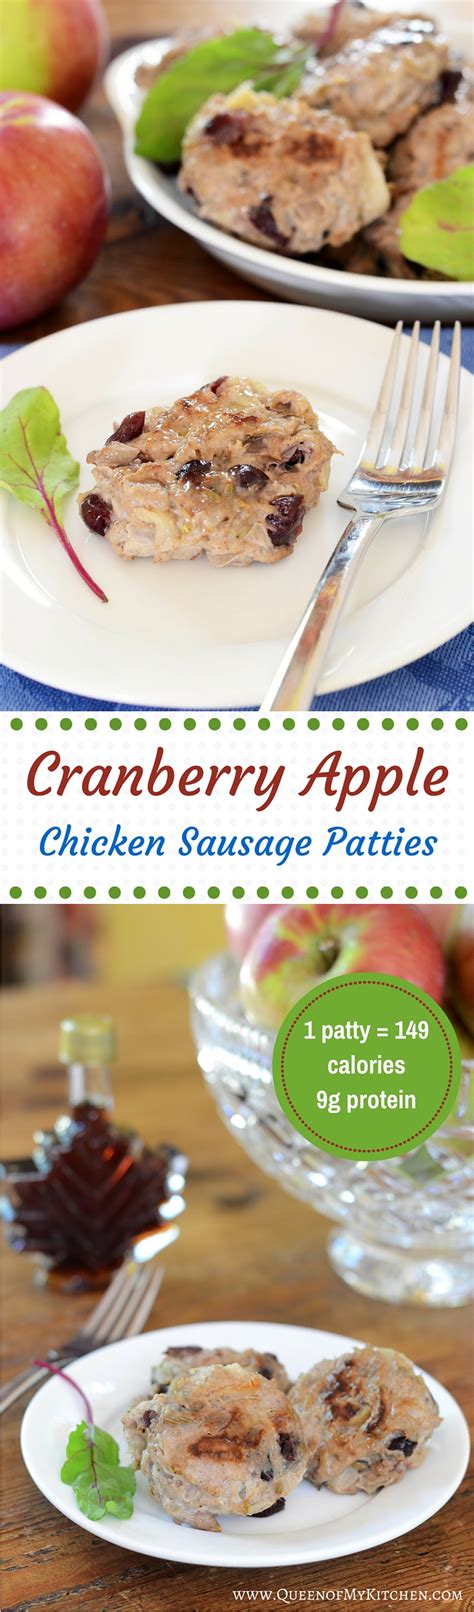 Apple chicken sausage is made with a few ingredients including chicken, dried apples and seasonings. Cranberry Apple Chicken Sausage Patties - Queen of My Kitchen